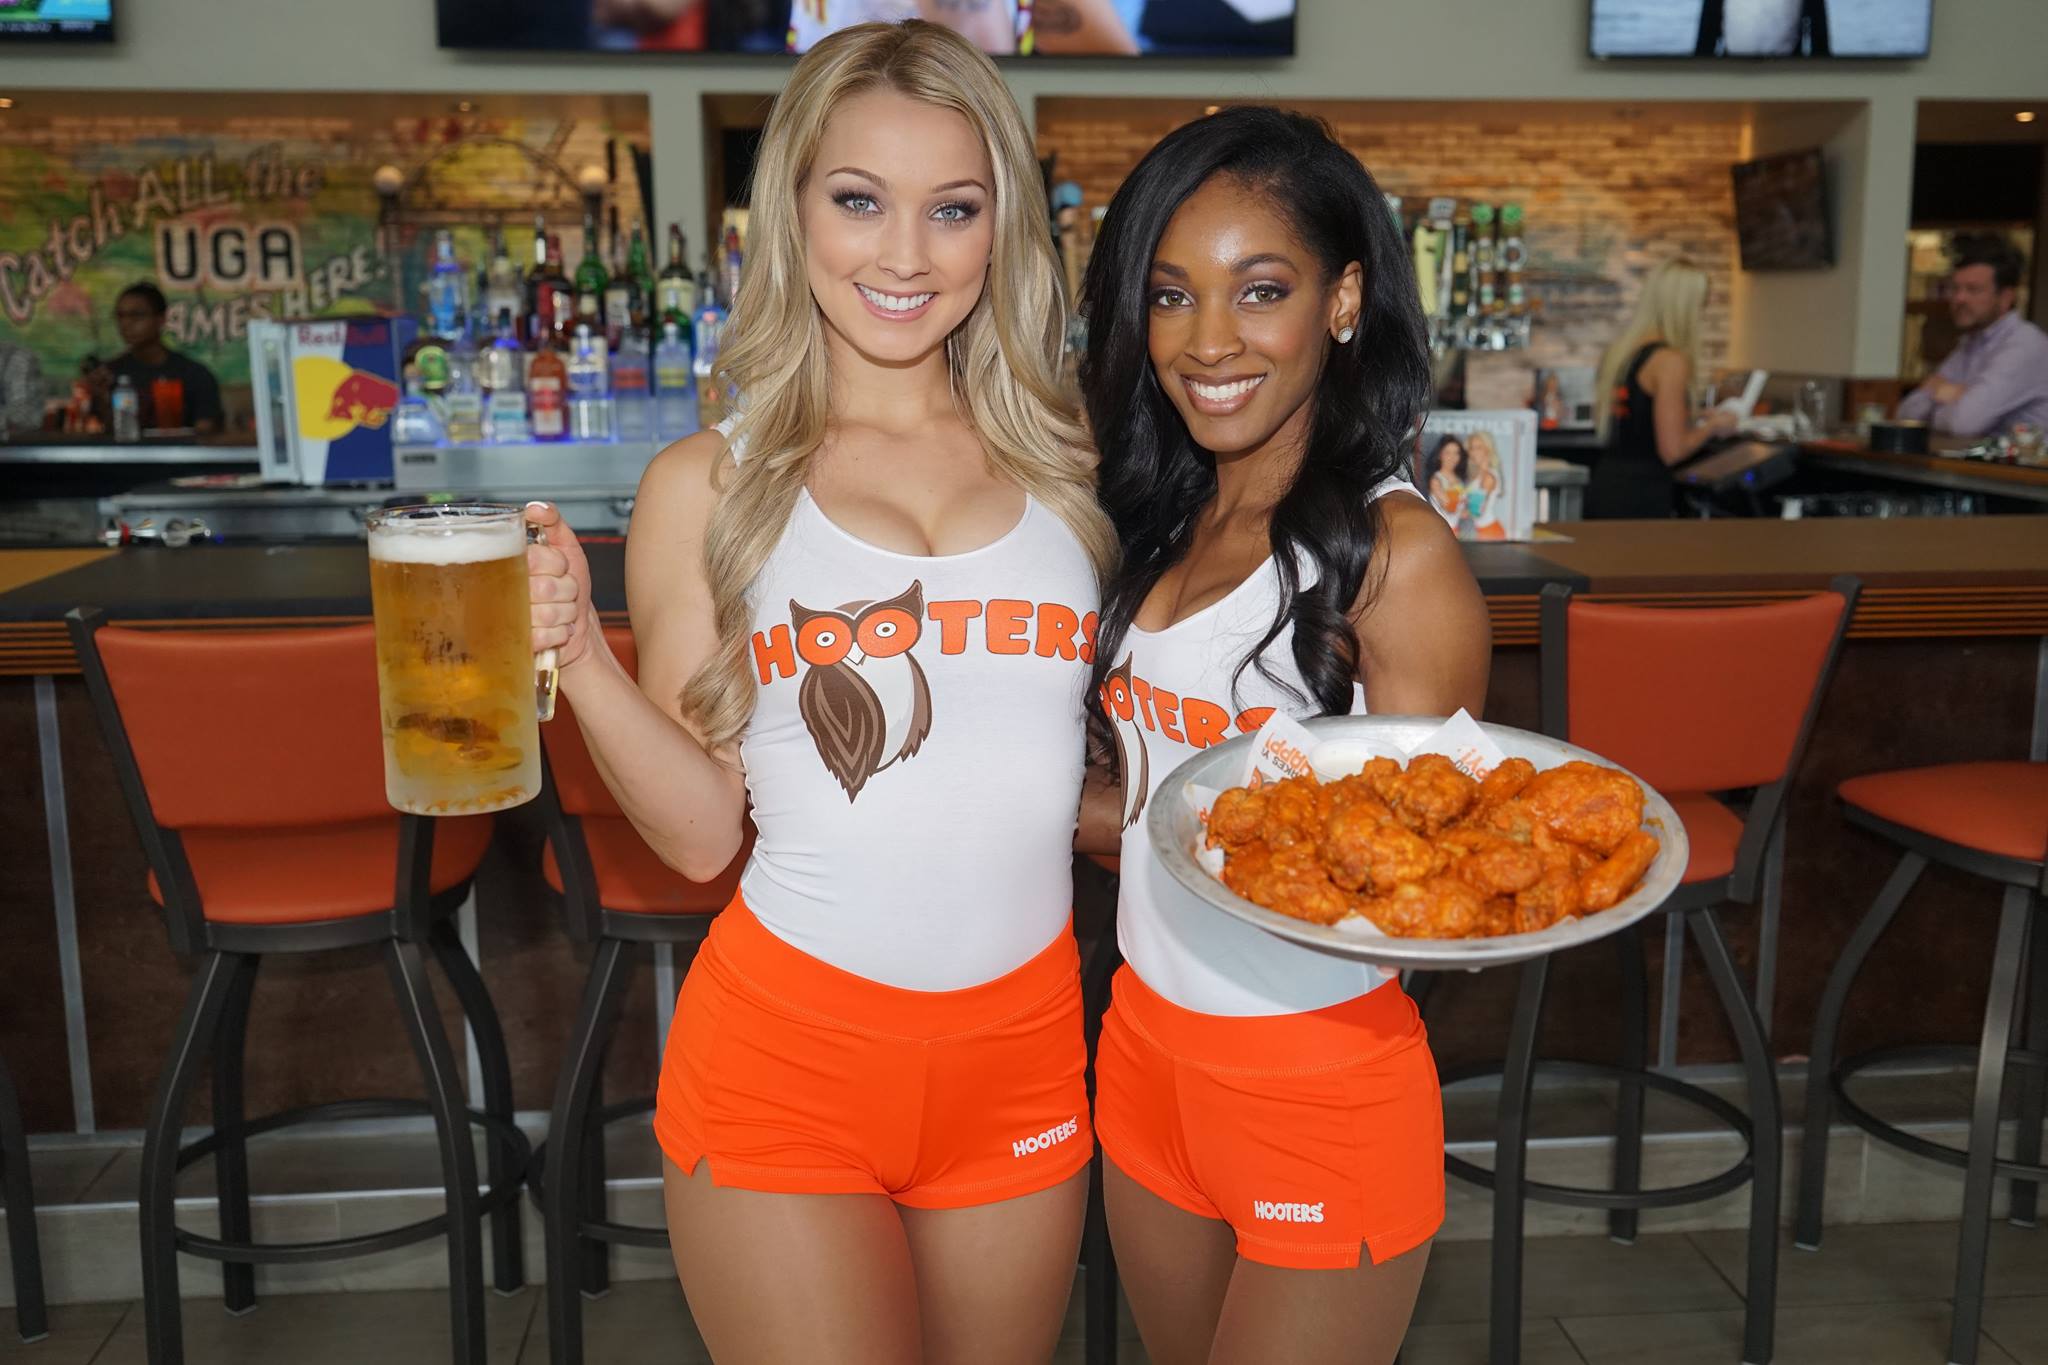 Hey Columbus, would you get a hoot out of a Hooters? 